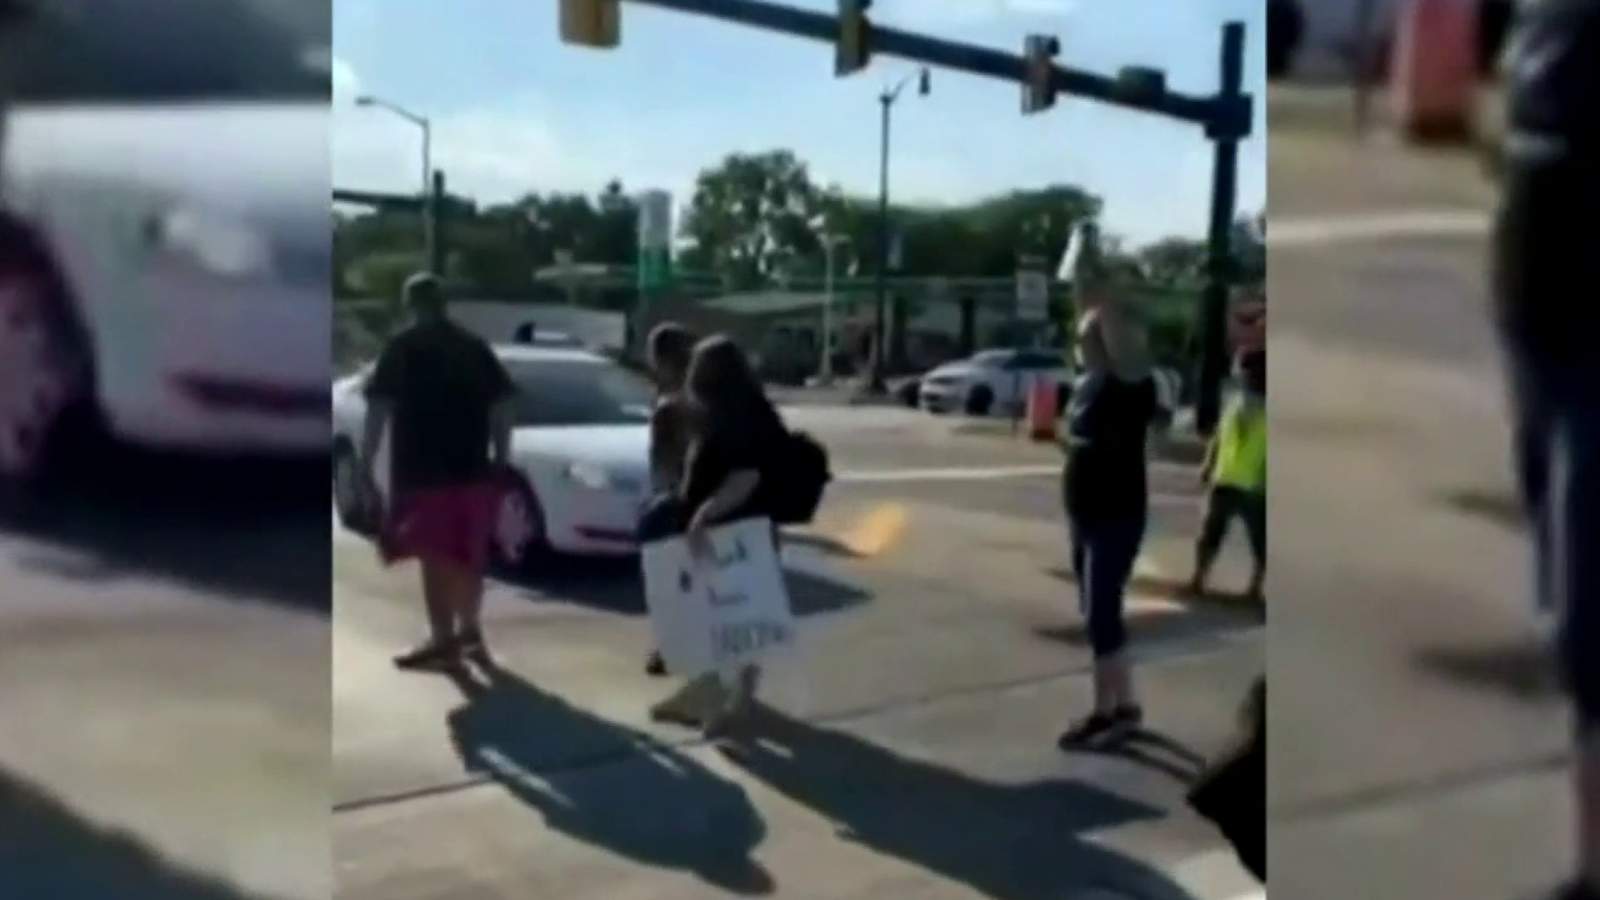 Wyandotte woman charged after injuring 1 in hit-and-run during protest in Taylor